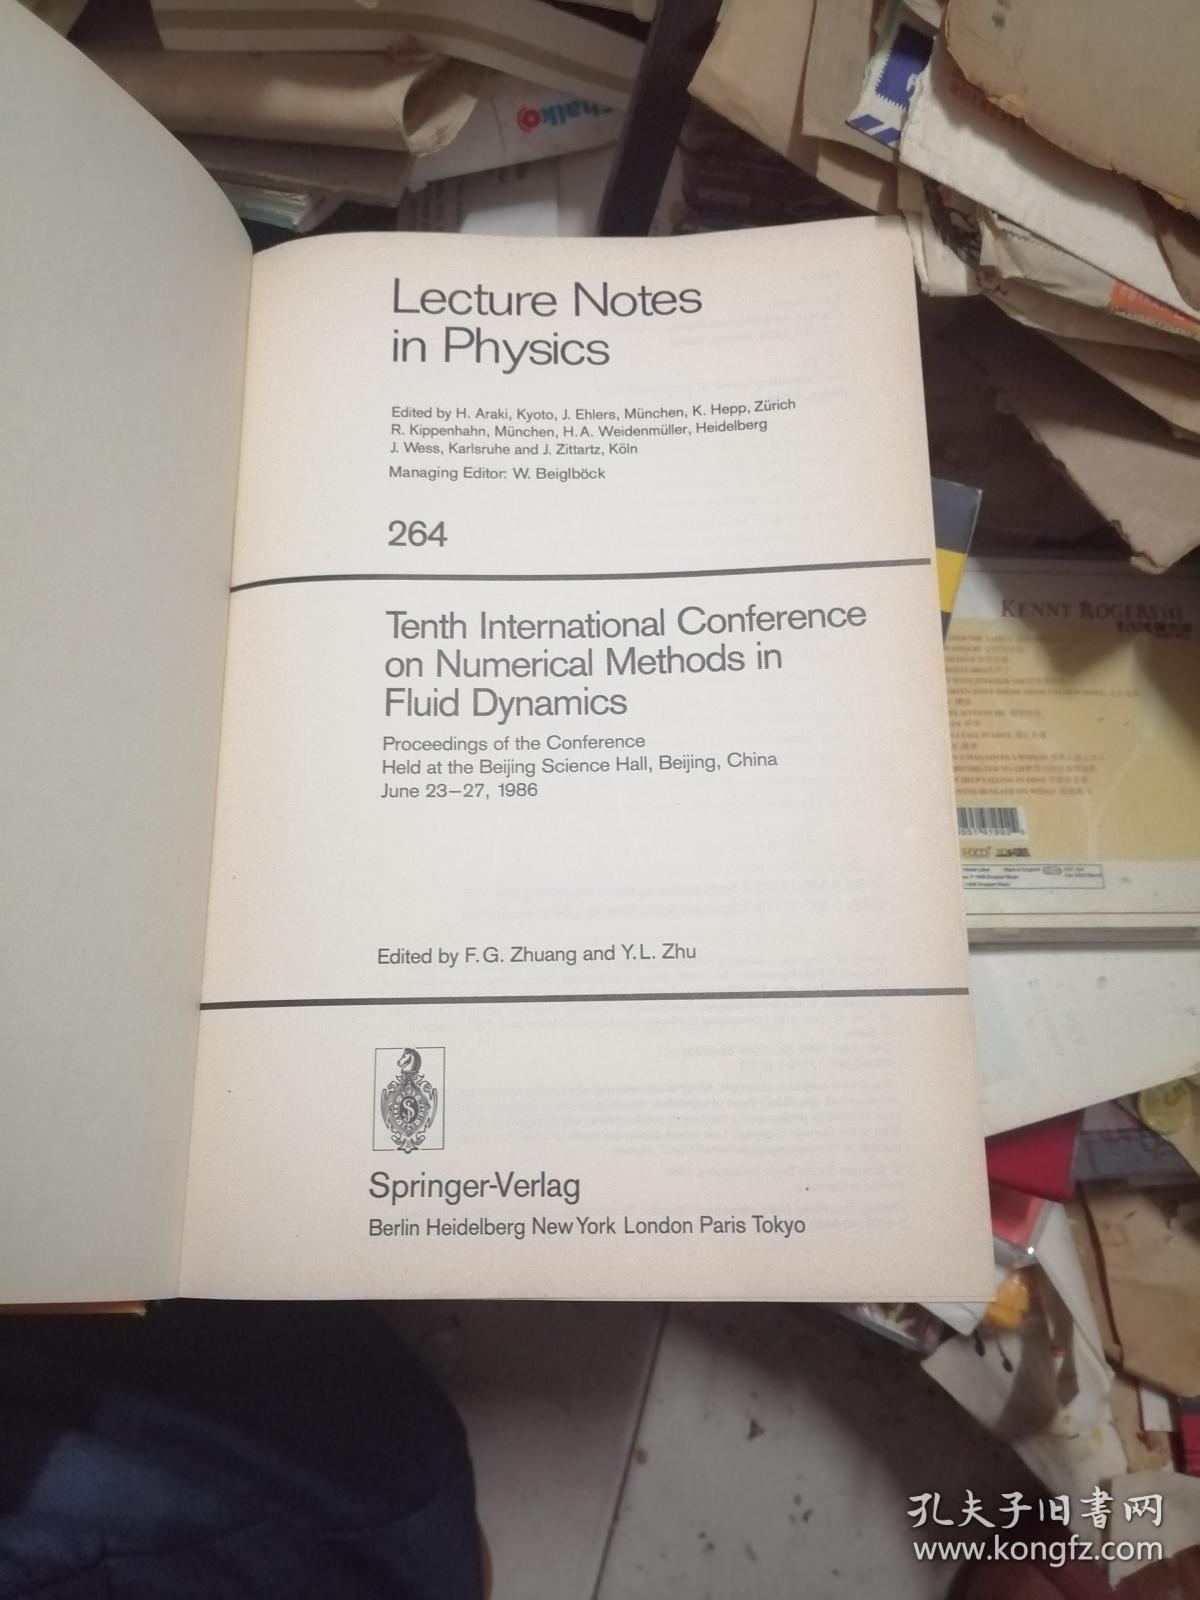 TENTH LNTERNATIONAL CONFERENCE ON NUMERICAL METHODS IN FLUID DYNAMICS